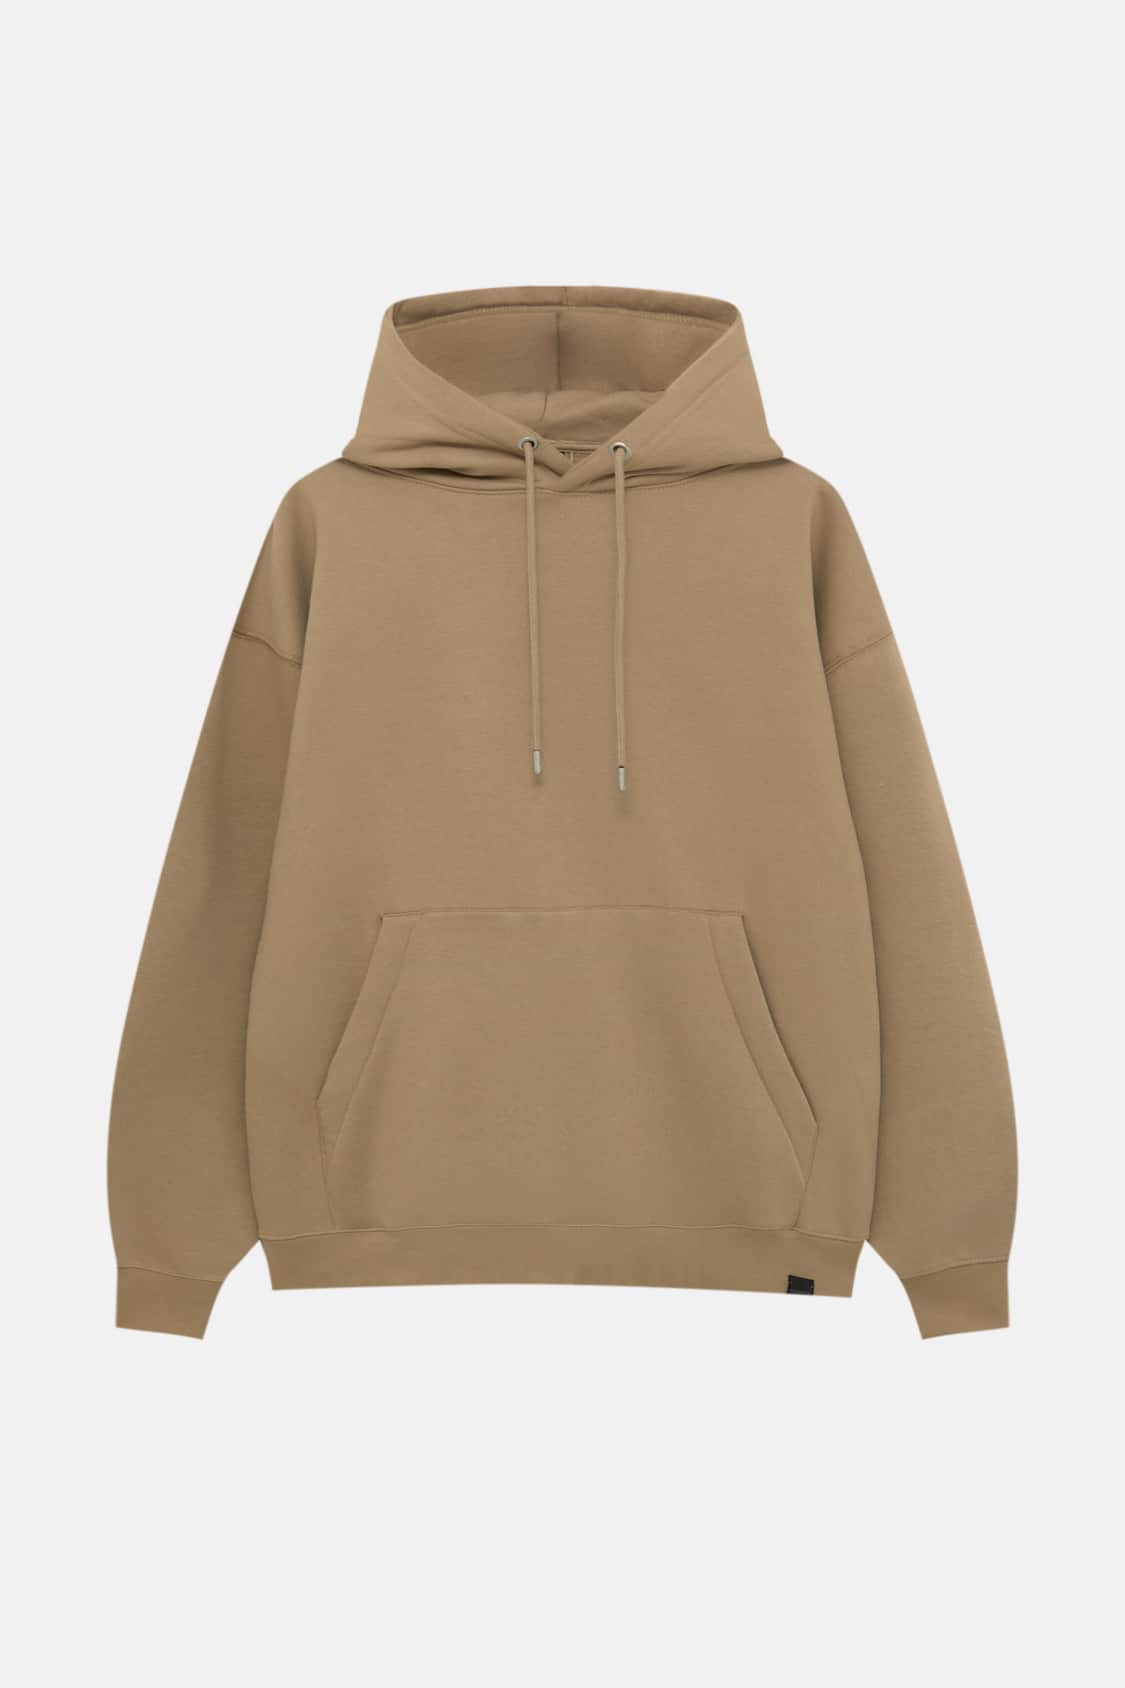 Represent's Collaborations and Partnerships in Hoodie Releases